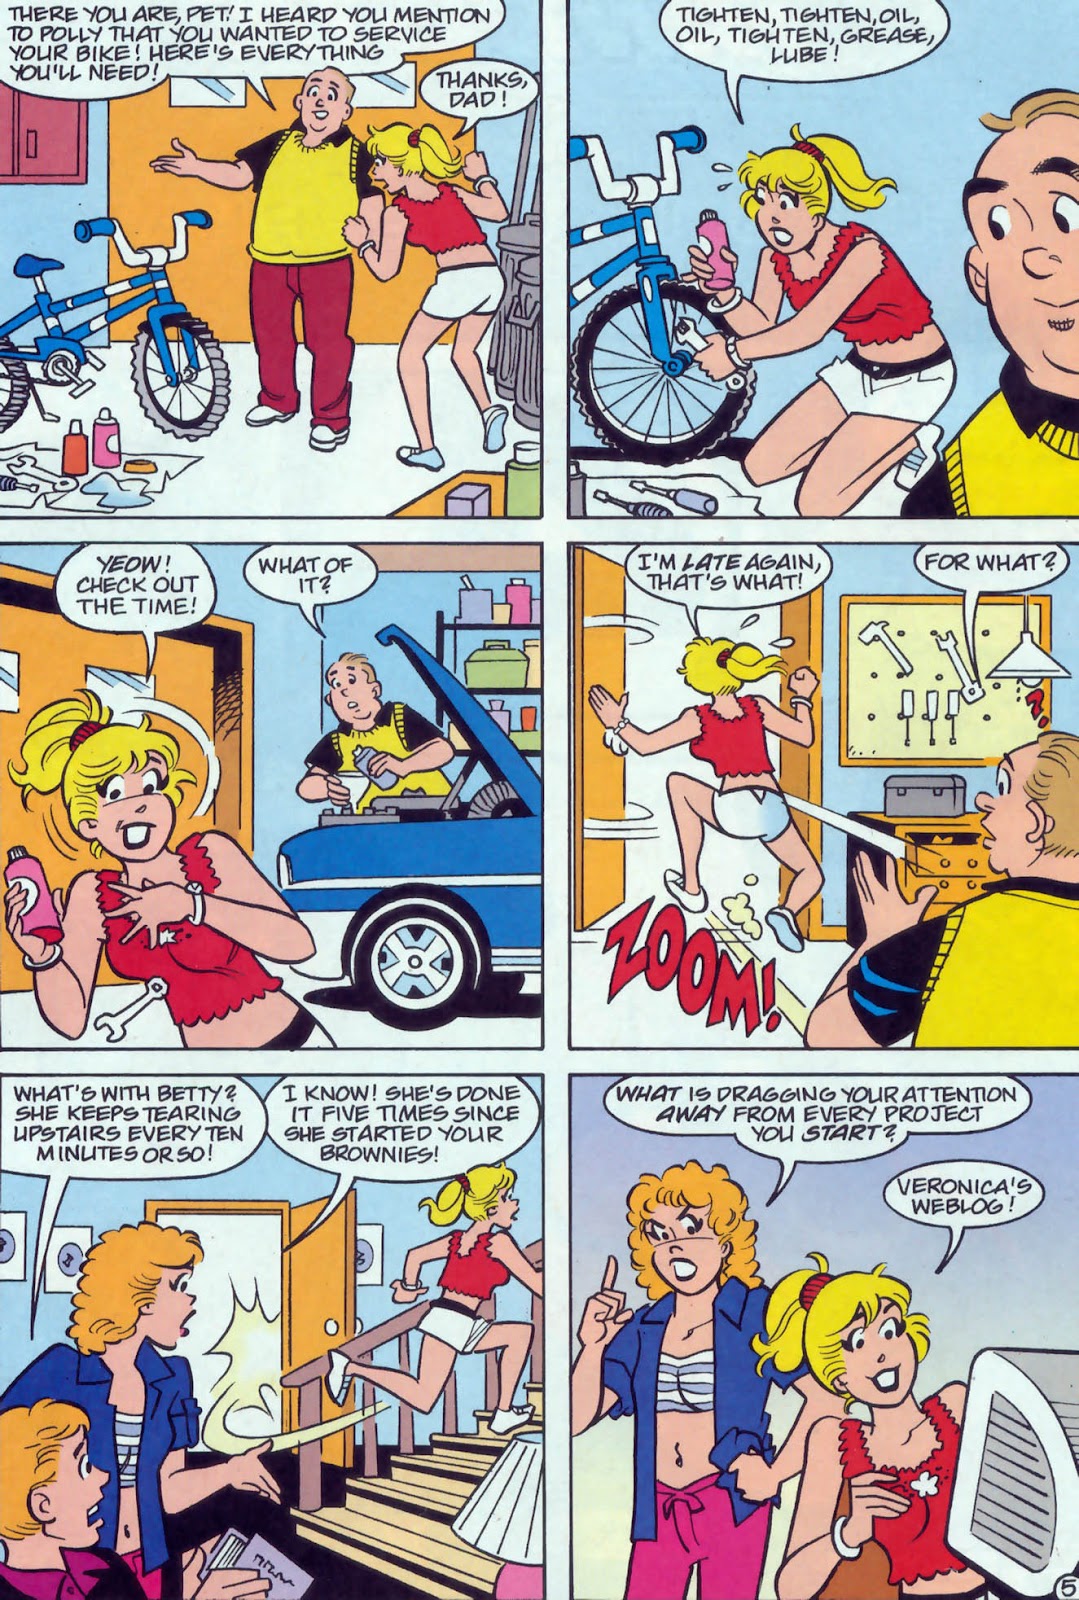 Betty issue 148 - Page 6